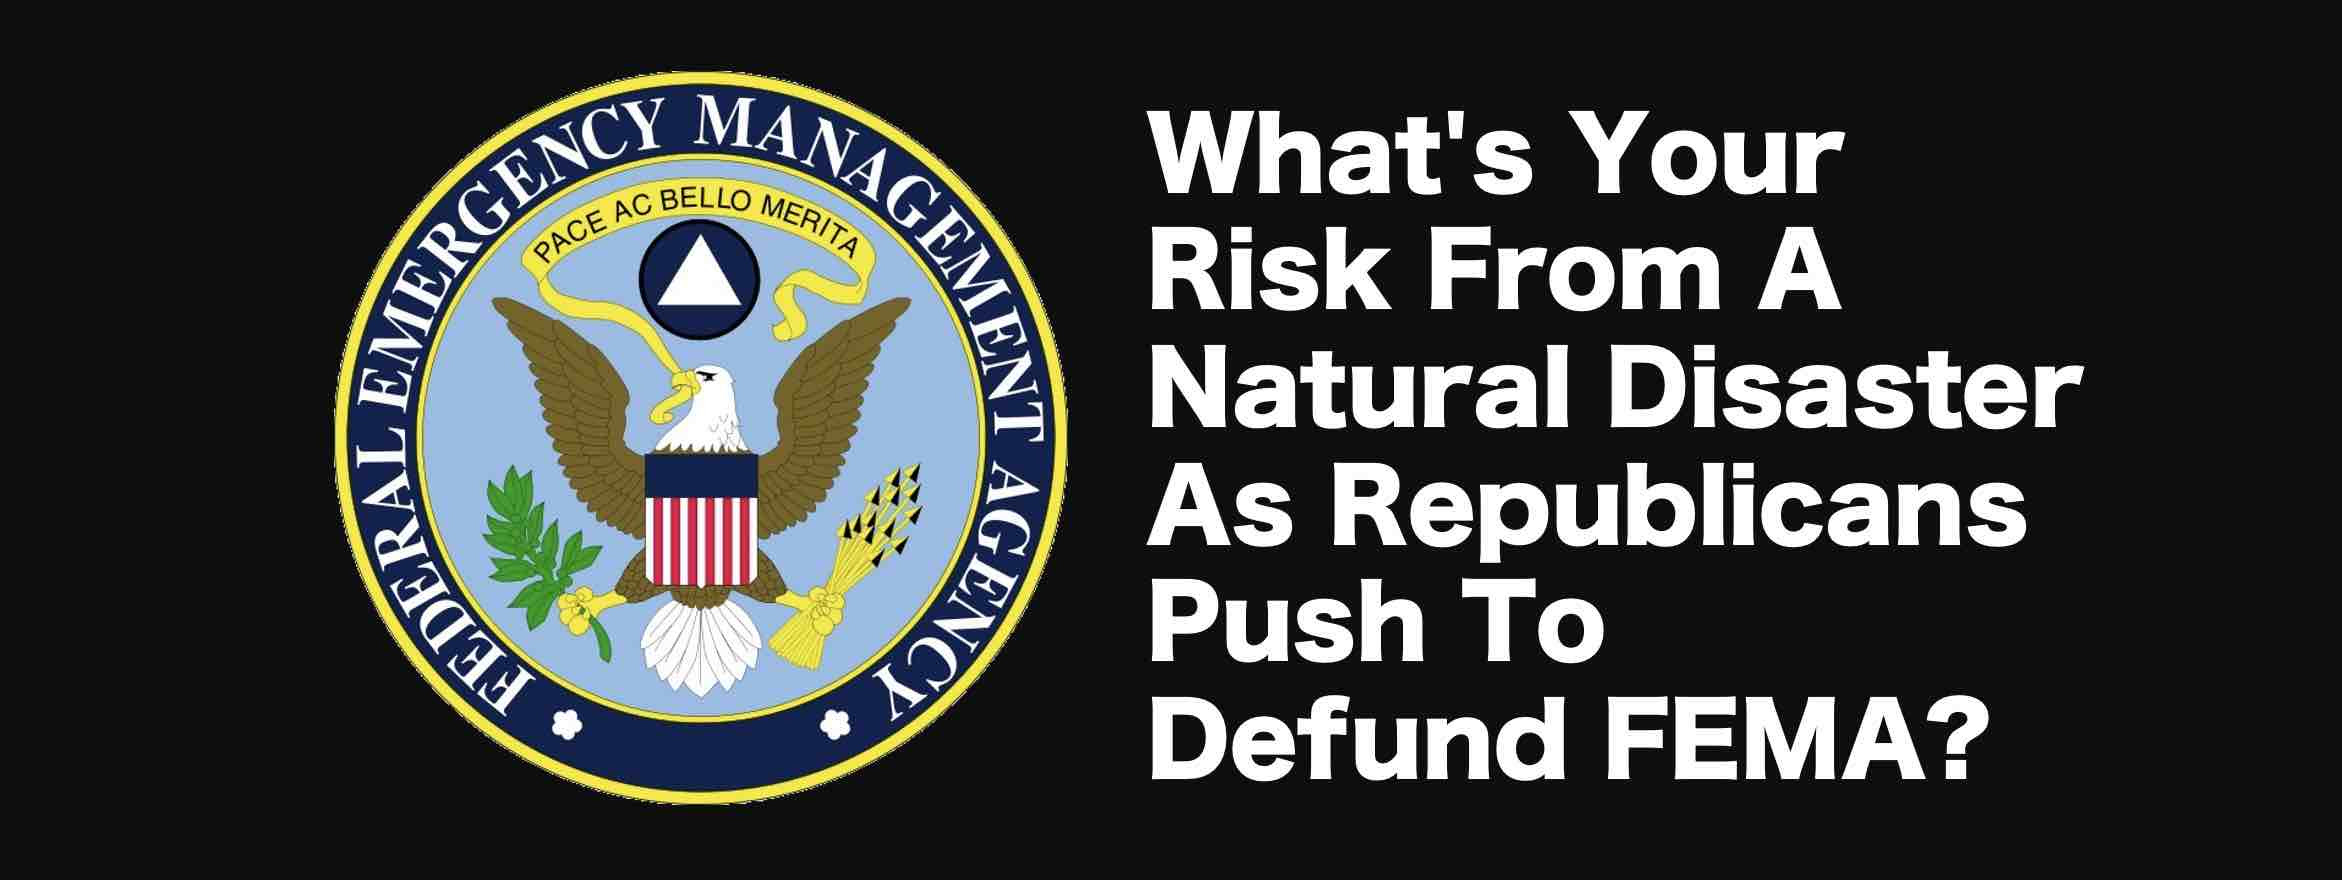 What's Your Risk From A Natural Disaster As Republicans Push To Defund FEMA?